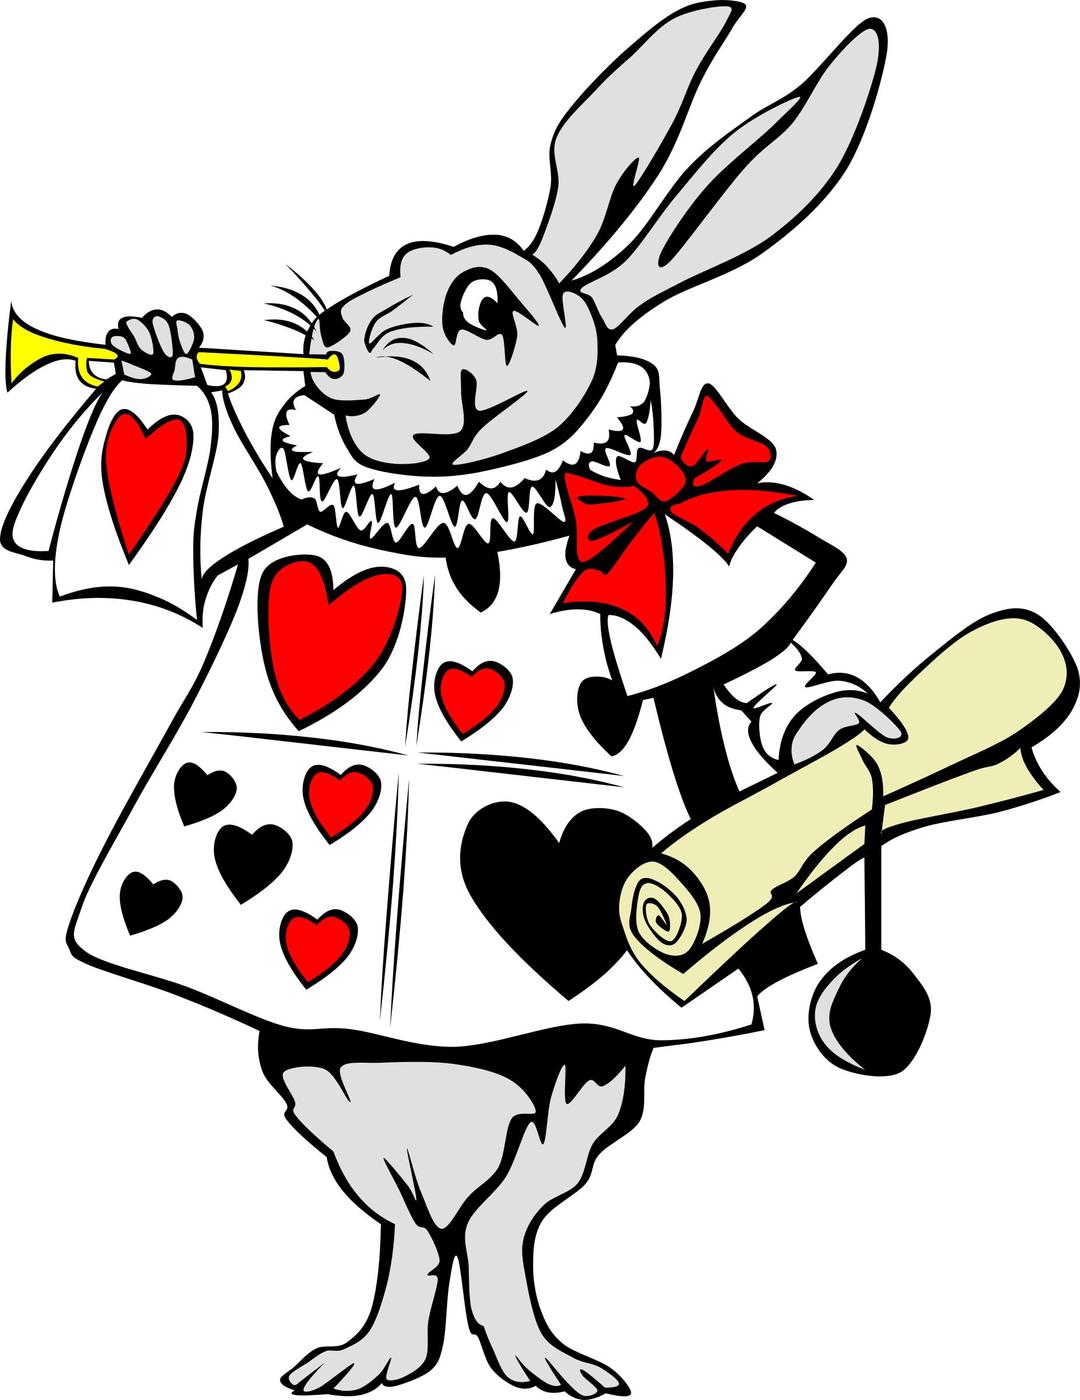 Rabbit from Alice in Wonderland png transparent